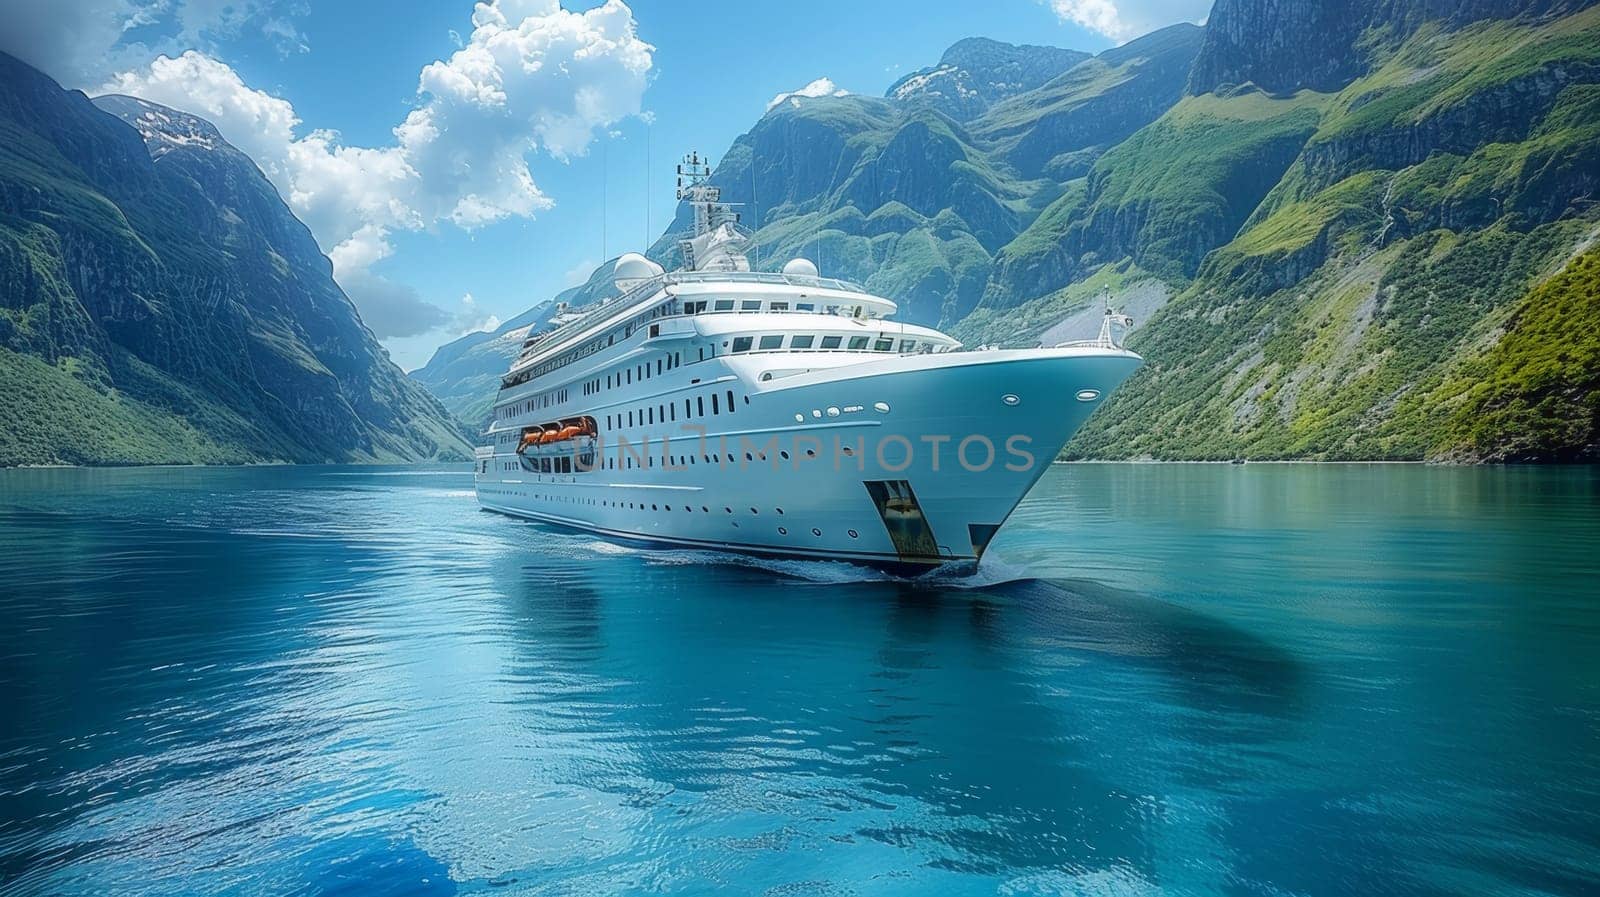 A large cruise ship is traveling through a body of water